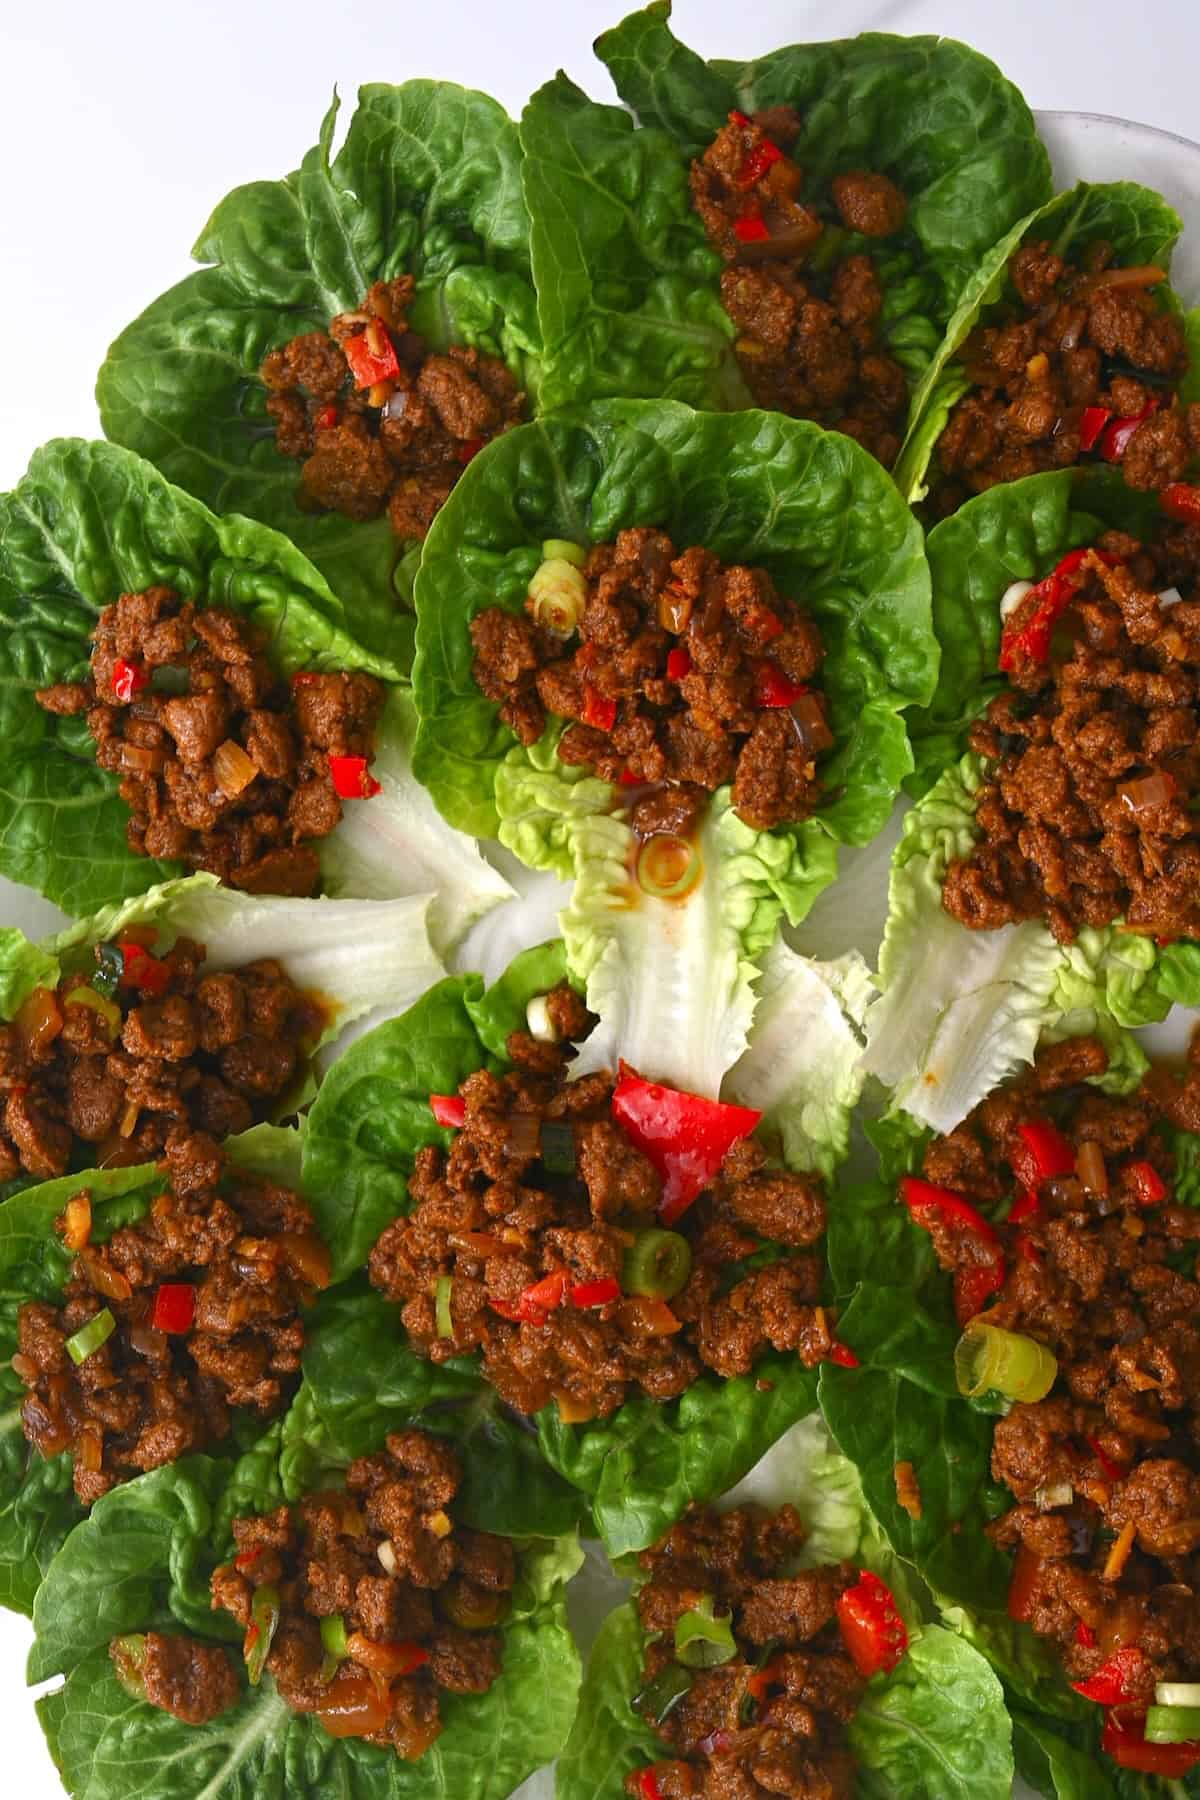 Lettuce wraps filled with mince filling